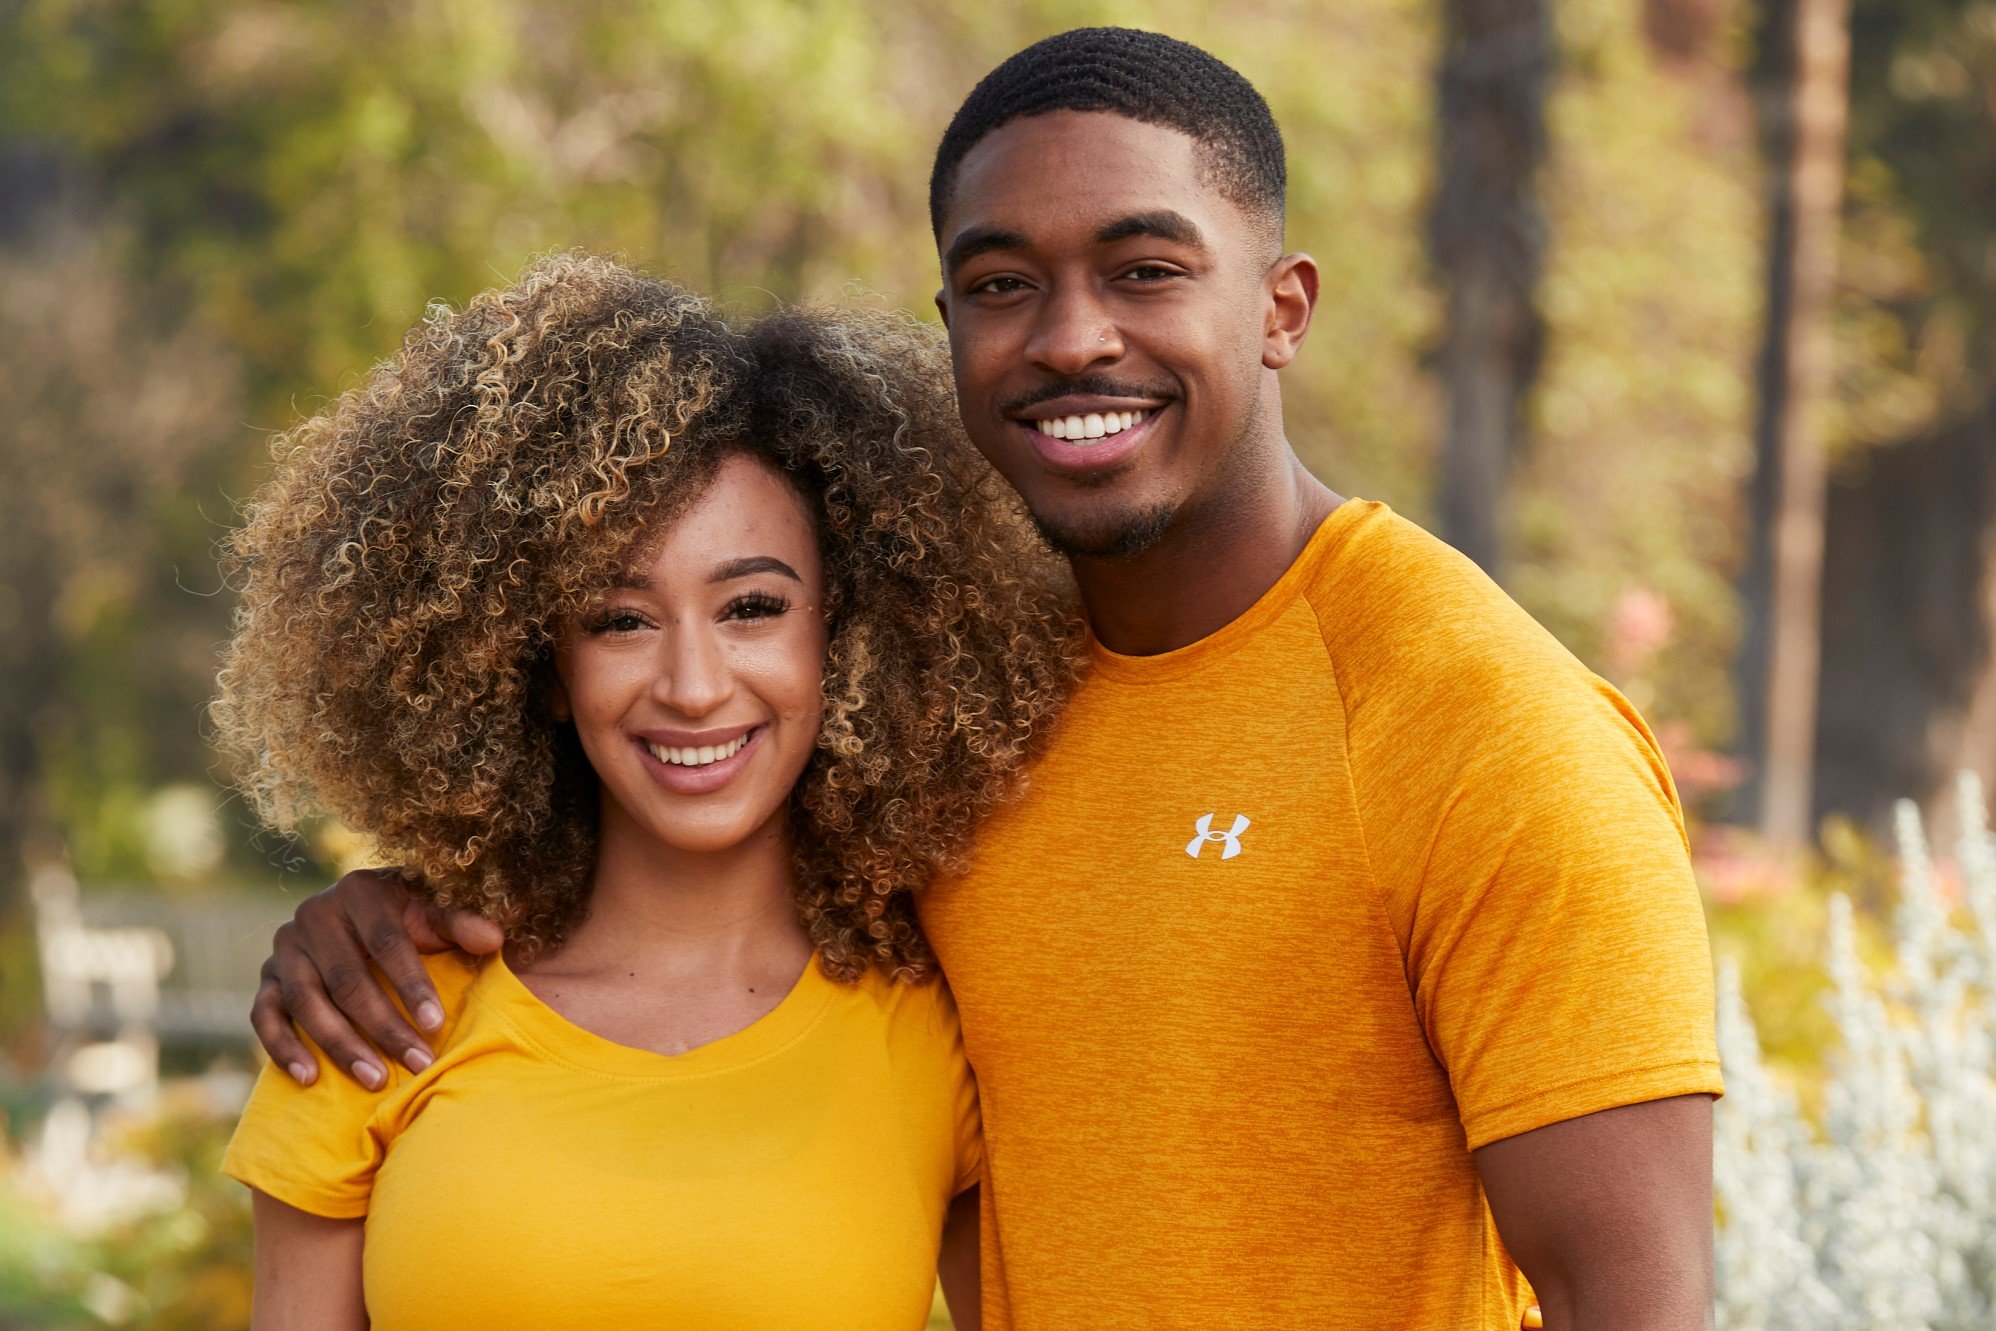 'The Amazing Race' Season 33 contestants Caro Viehweg and Ray Gantt pose for promotional pictures. They are both wearing yellow shirts.